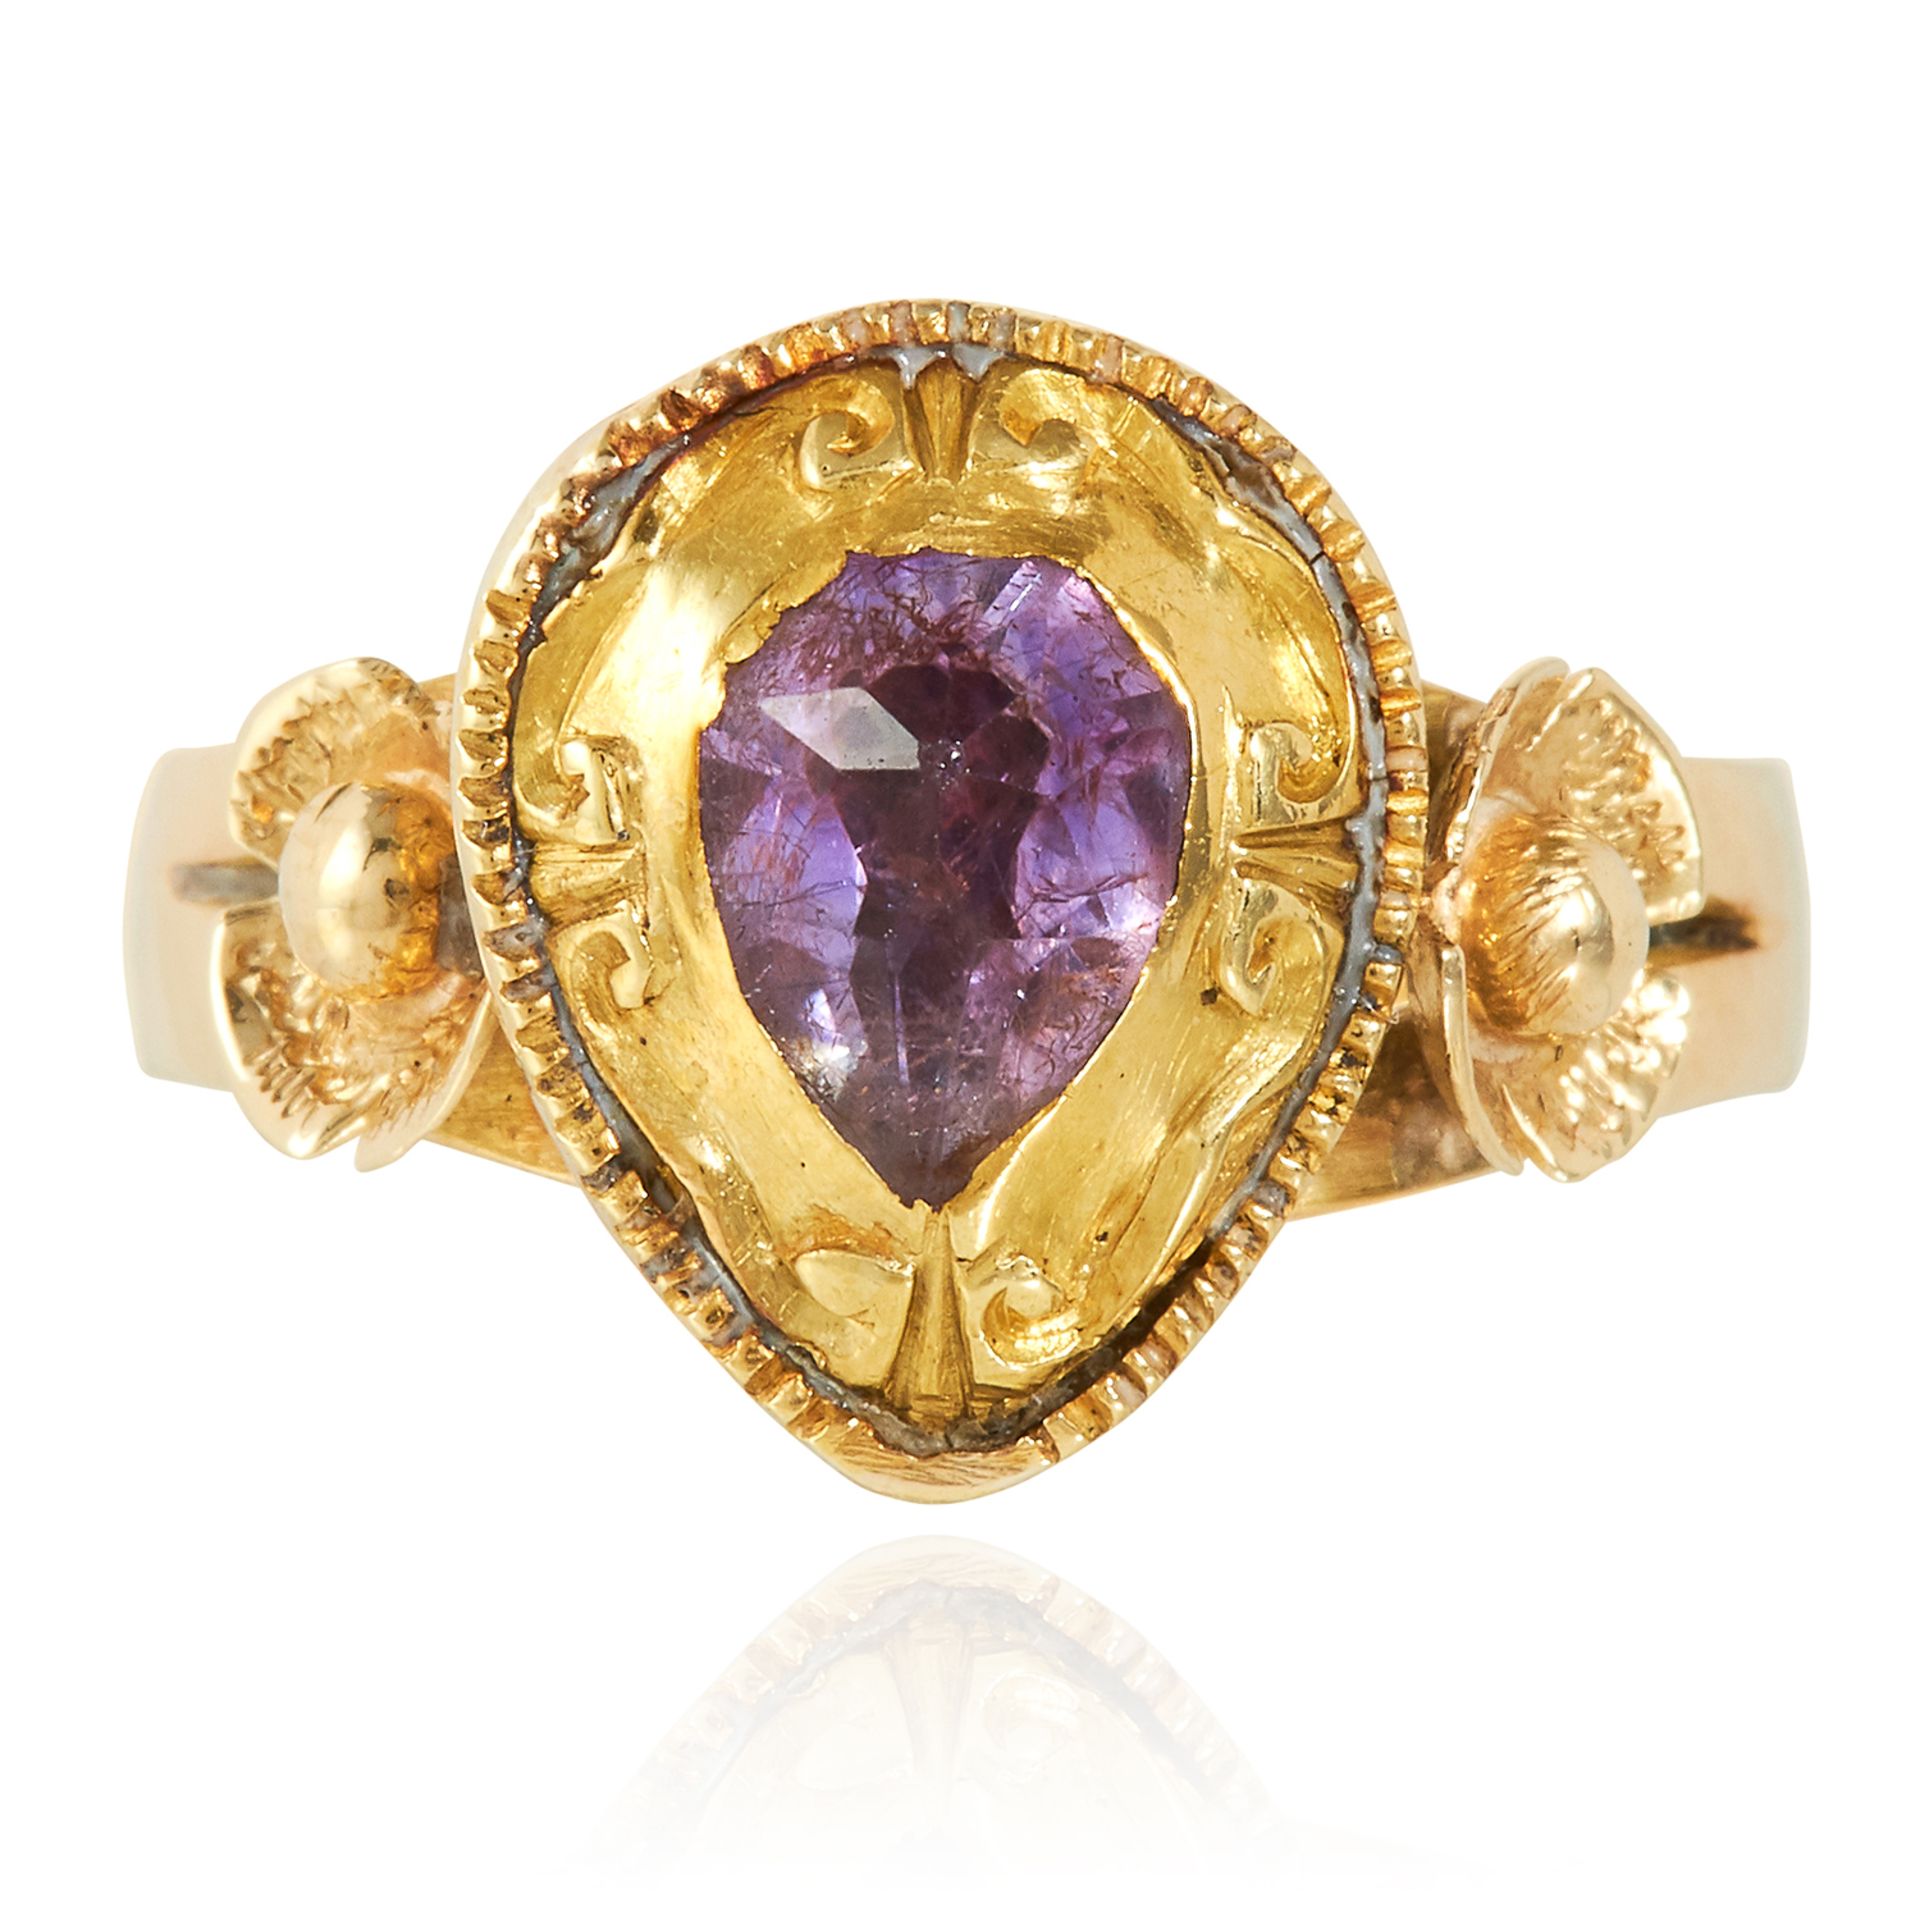 AN ANTIQUE AMETHYST DRESS RING, SPANISH in high carat yellow gold, set with a pear shaped rose cut